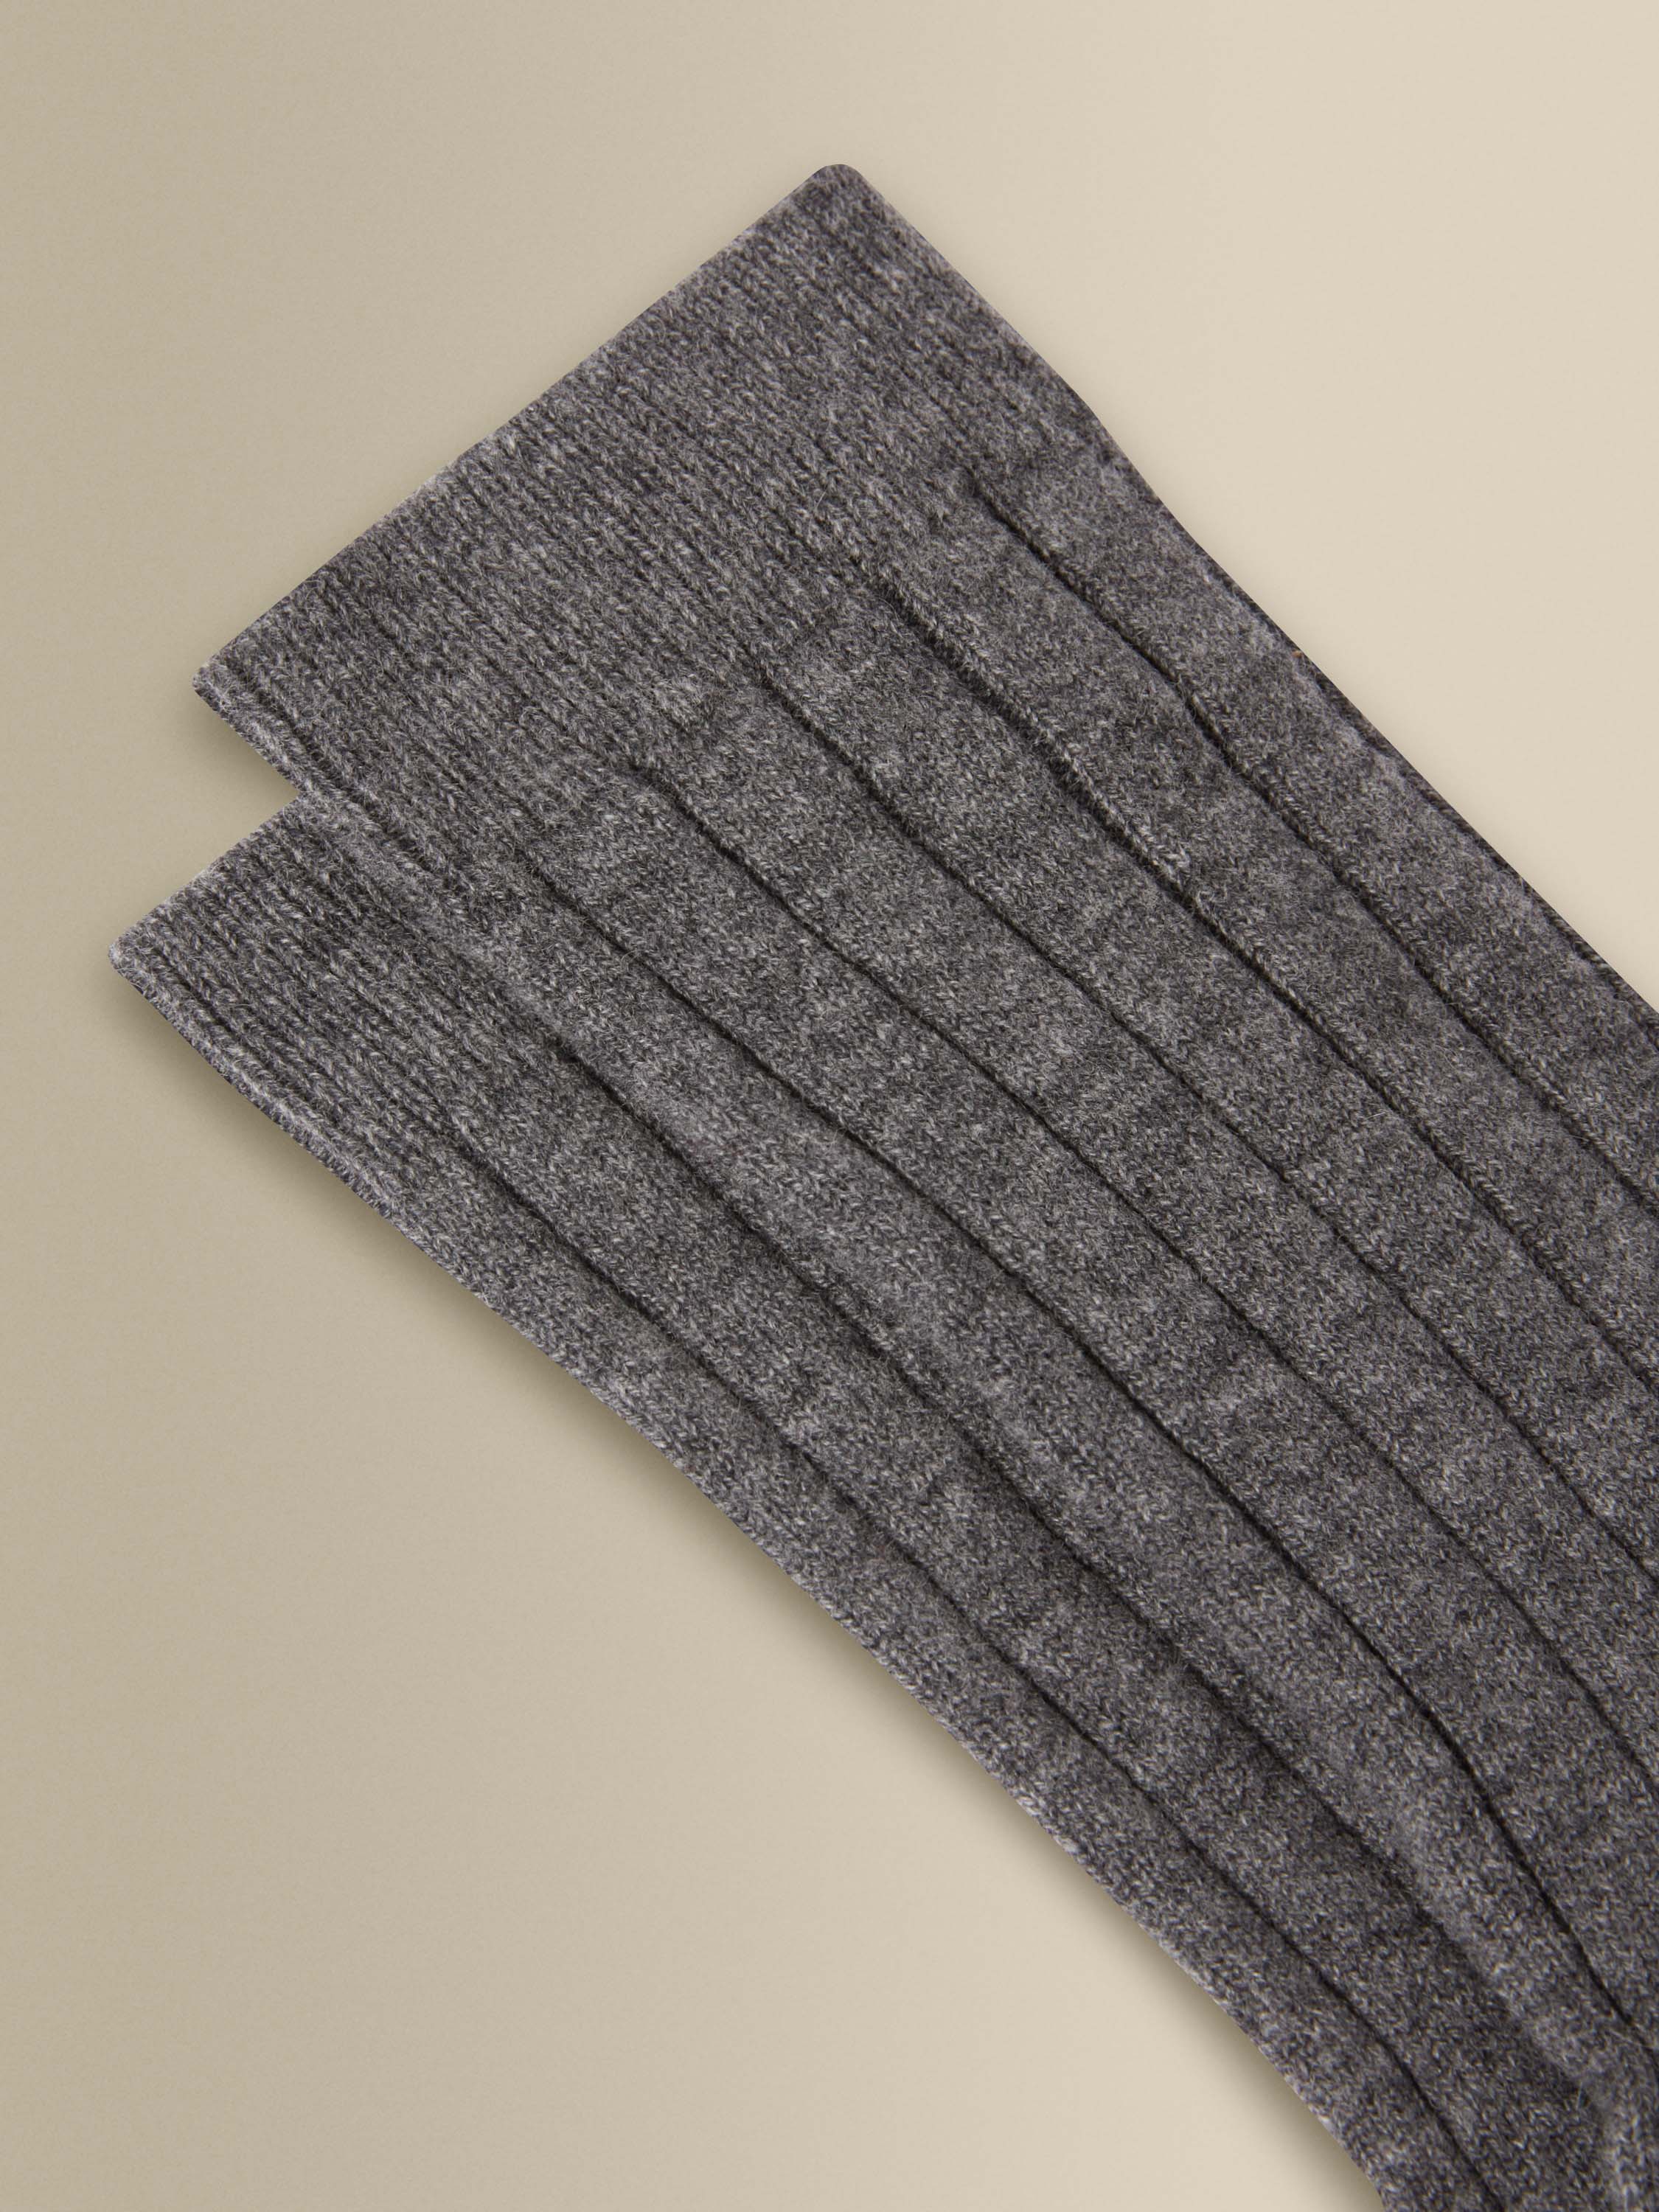 Cashmere Knitted Socks Charcoal Detail Product Image